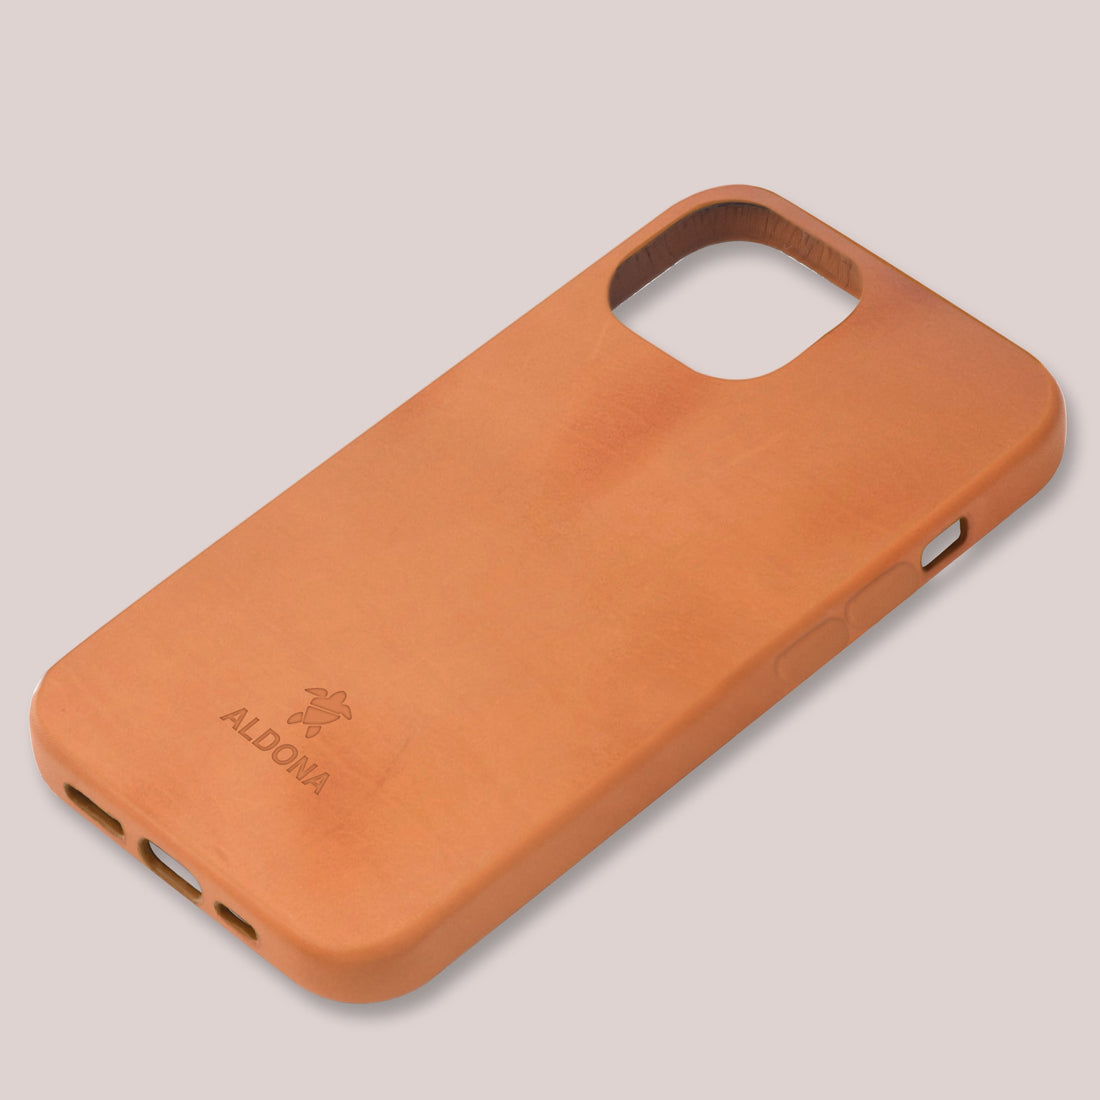 Kalon Case for iPhone 13 series with MagSafe Compatibility - Burnt Tobacco